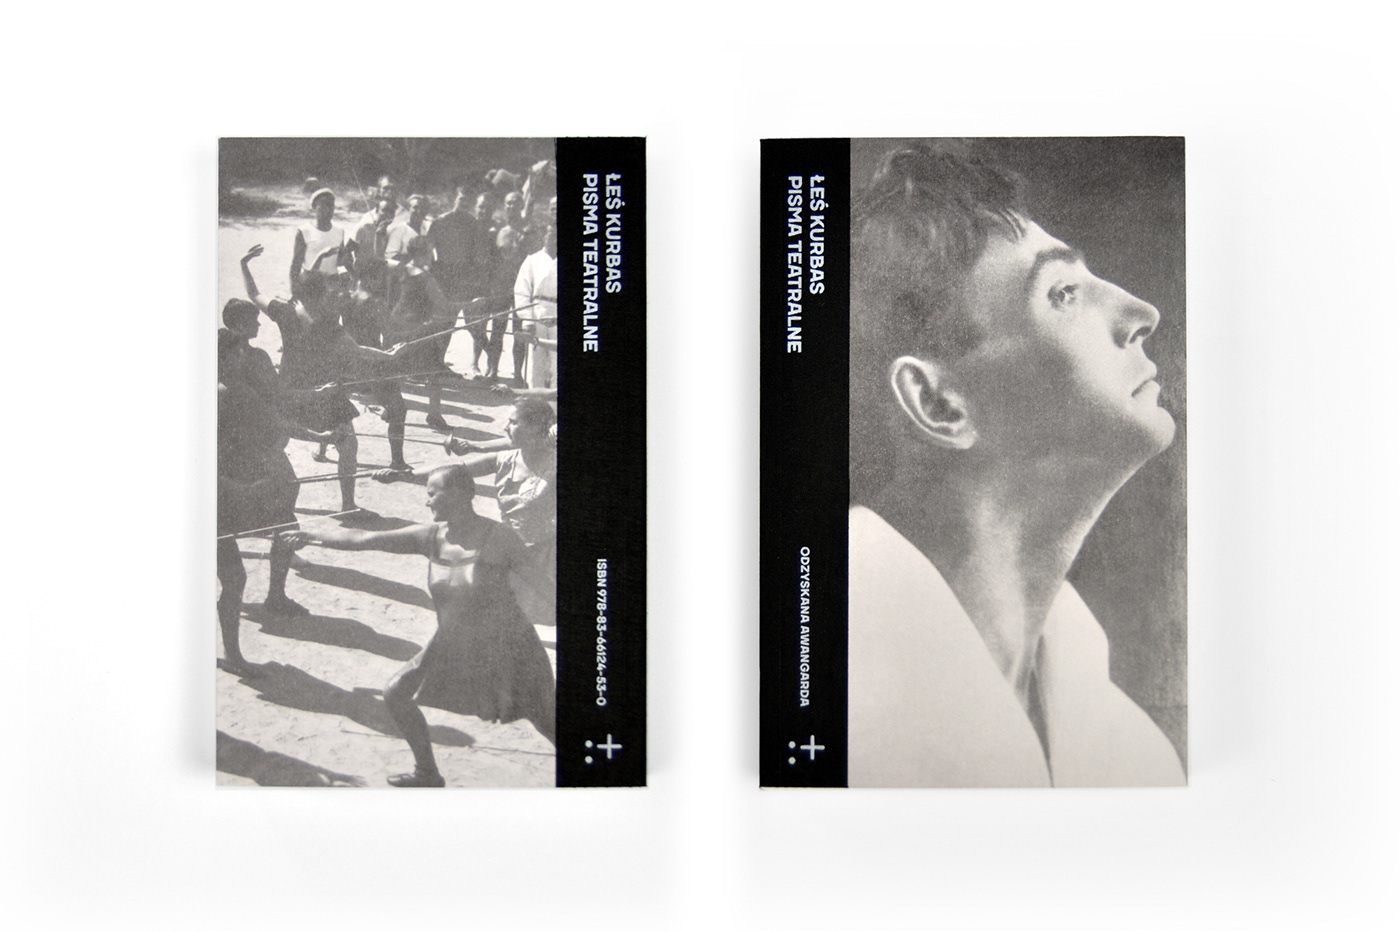 avant garde book Book Series cover Layout modern publication series Theatre typography  